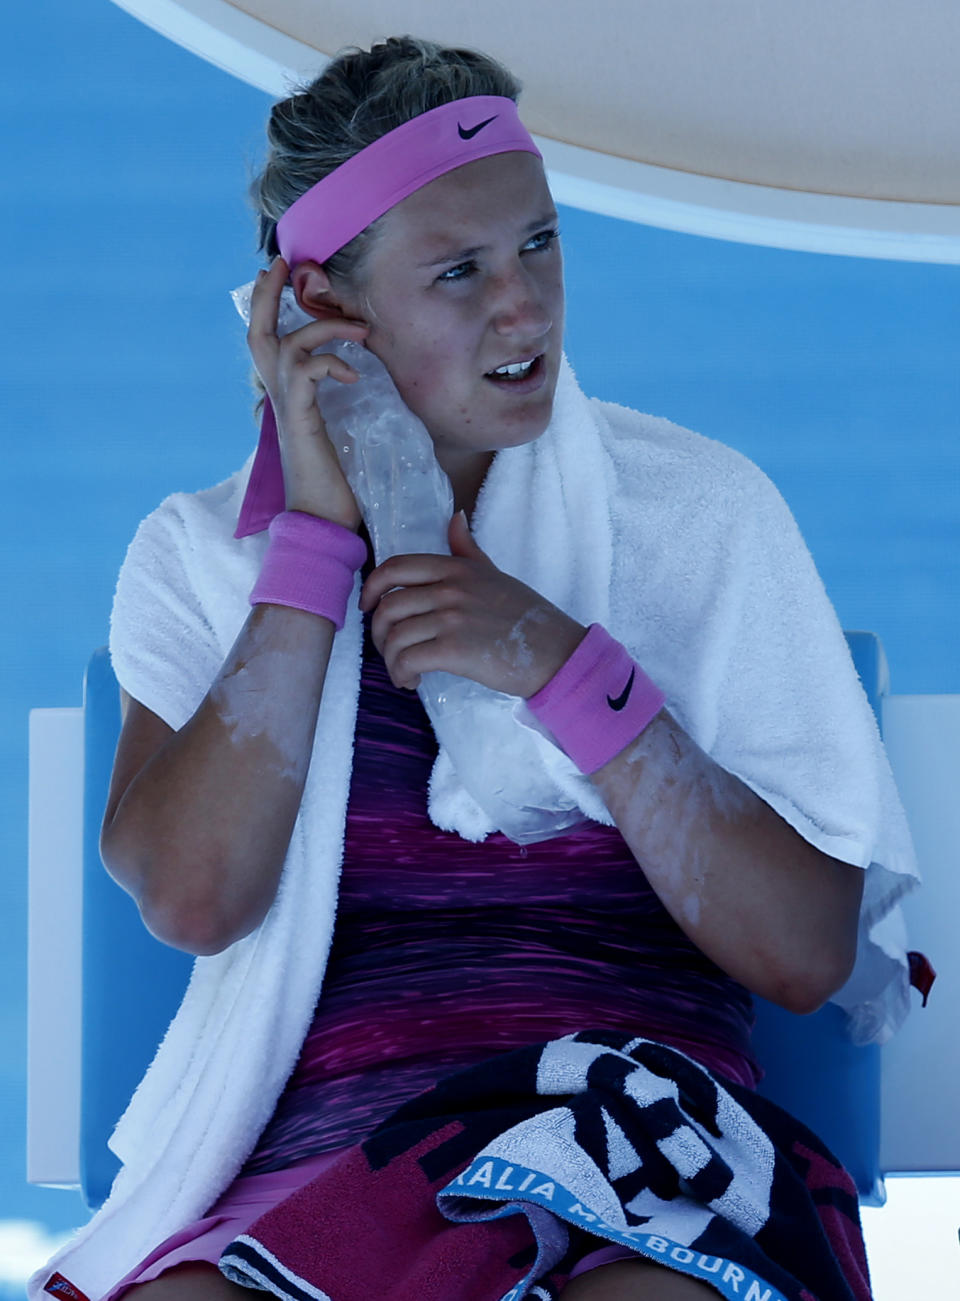 Victoria Azarenka of Belarus holds an ice pack to her face during a break in her first round match against Johanna Larsson of Sweden at the Australian Open tennis championship in Melbourne, Australia, Tuesday, Jan. 14, 2014.(AP Photo/Eugene Hoshiko)